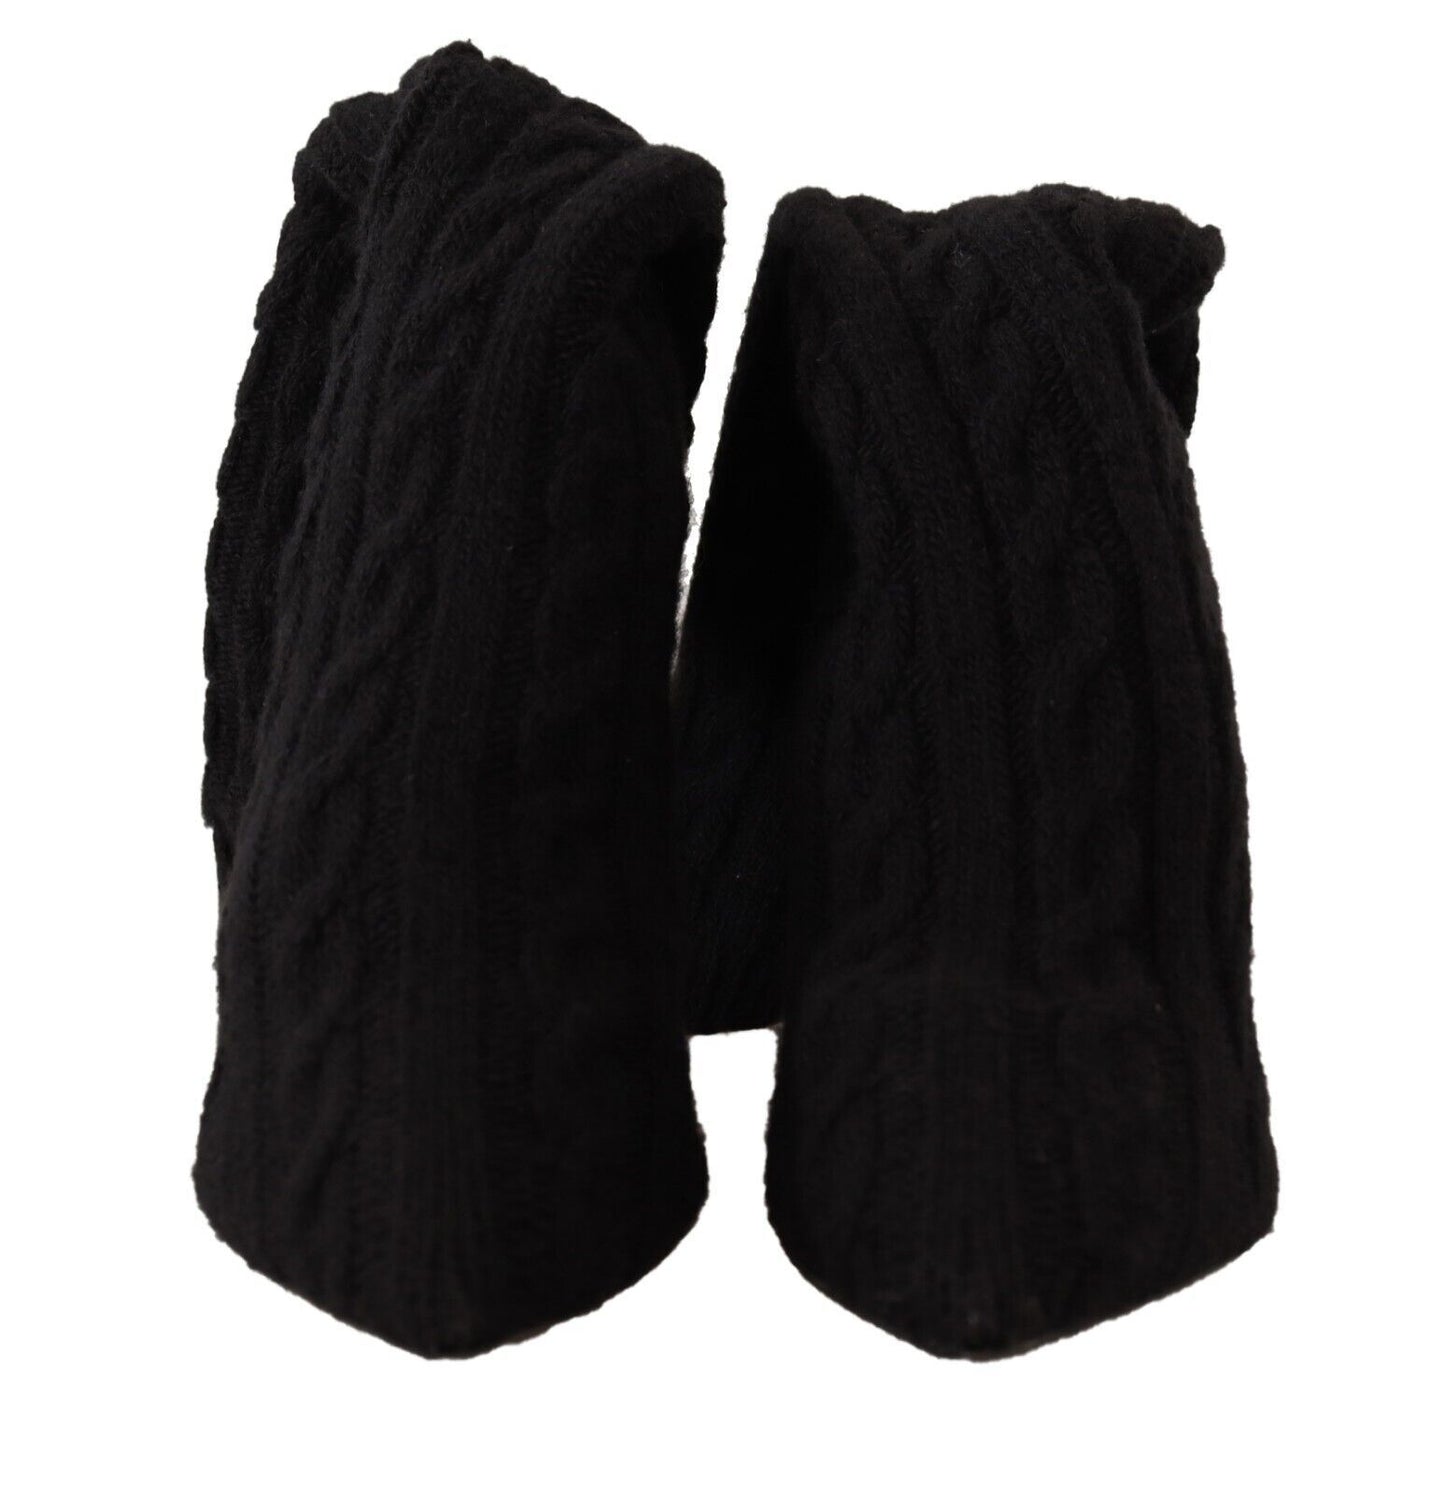 a pair of black mittens on a white background